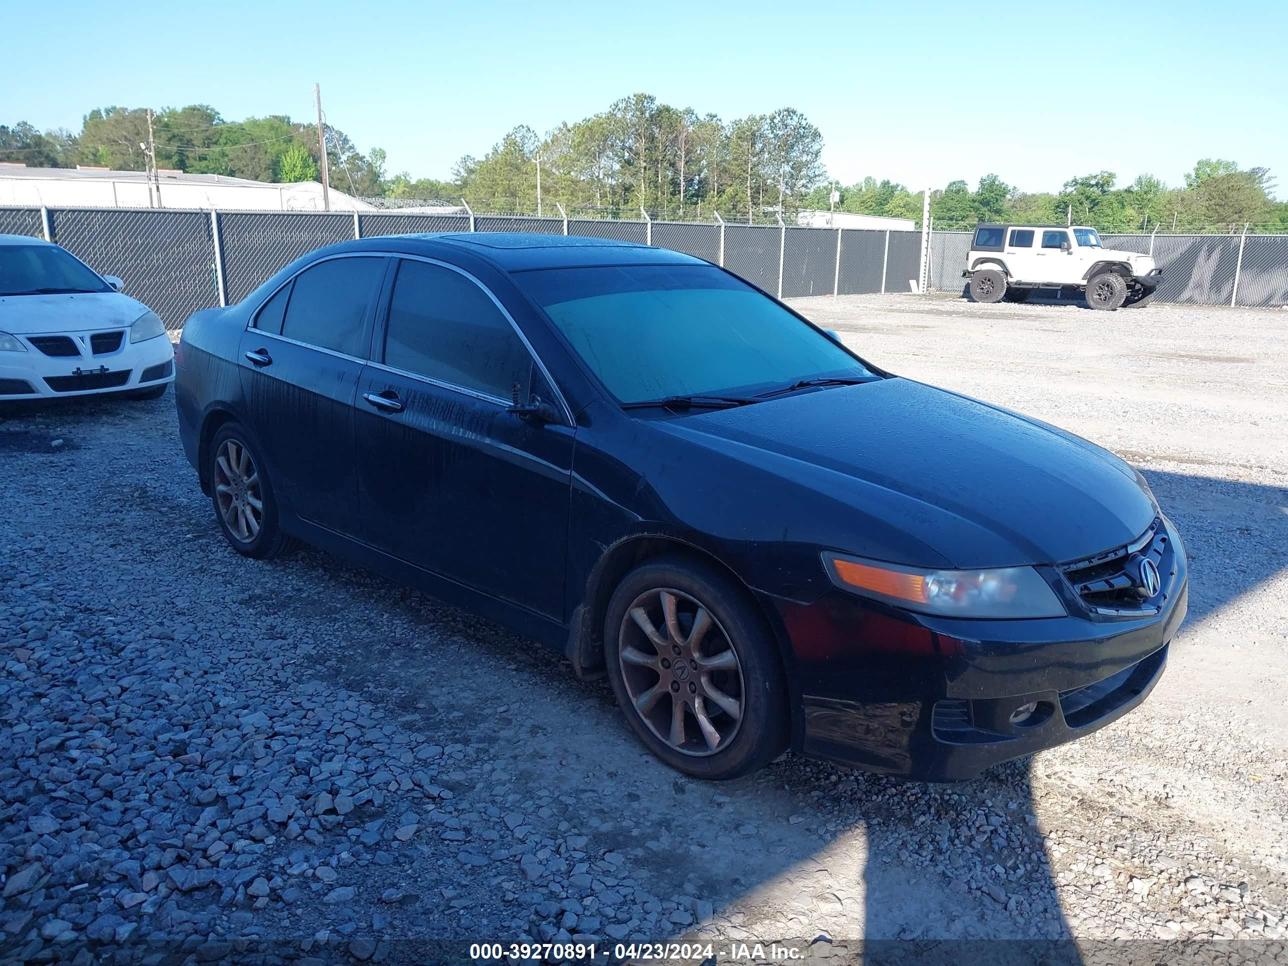 vin: JH4CL96808C004032 JH4CL96808C004032 2008 acura tsx 2400 for Sale in 31217, 2200 Trade Drive, Macon, Georgia, USA